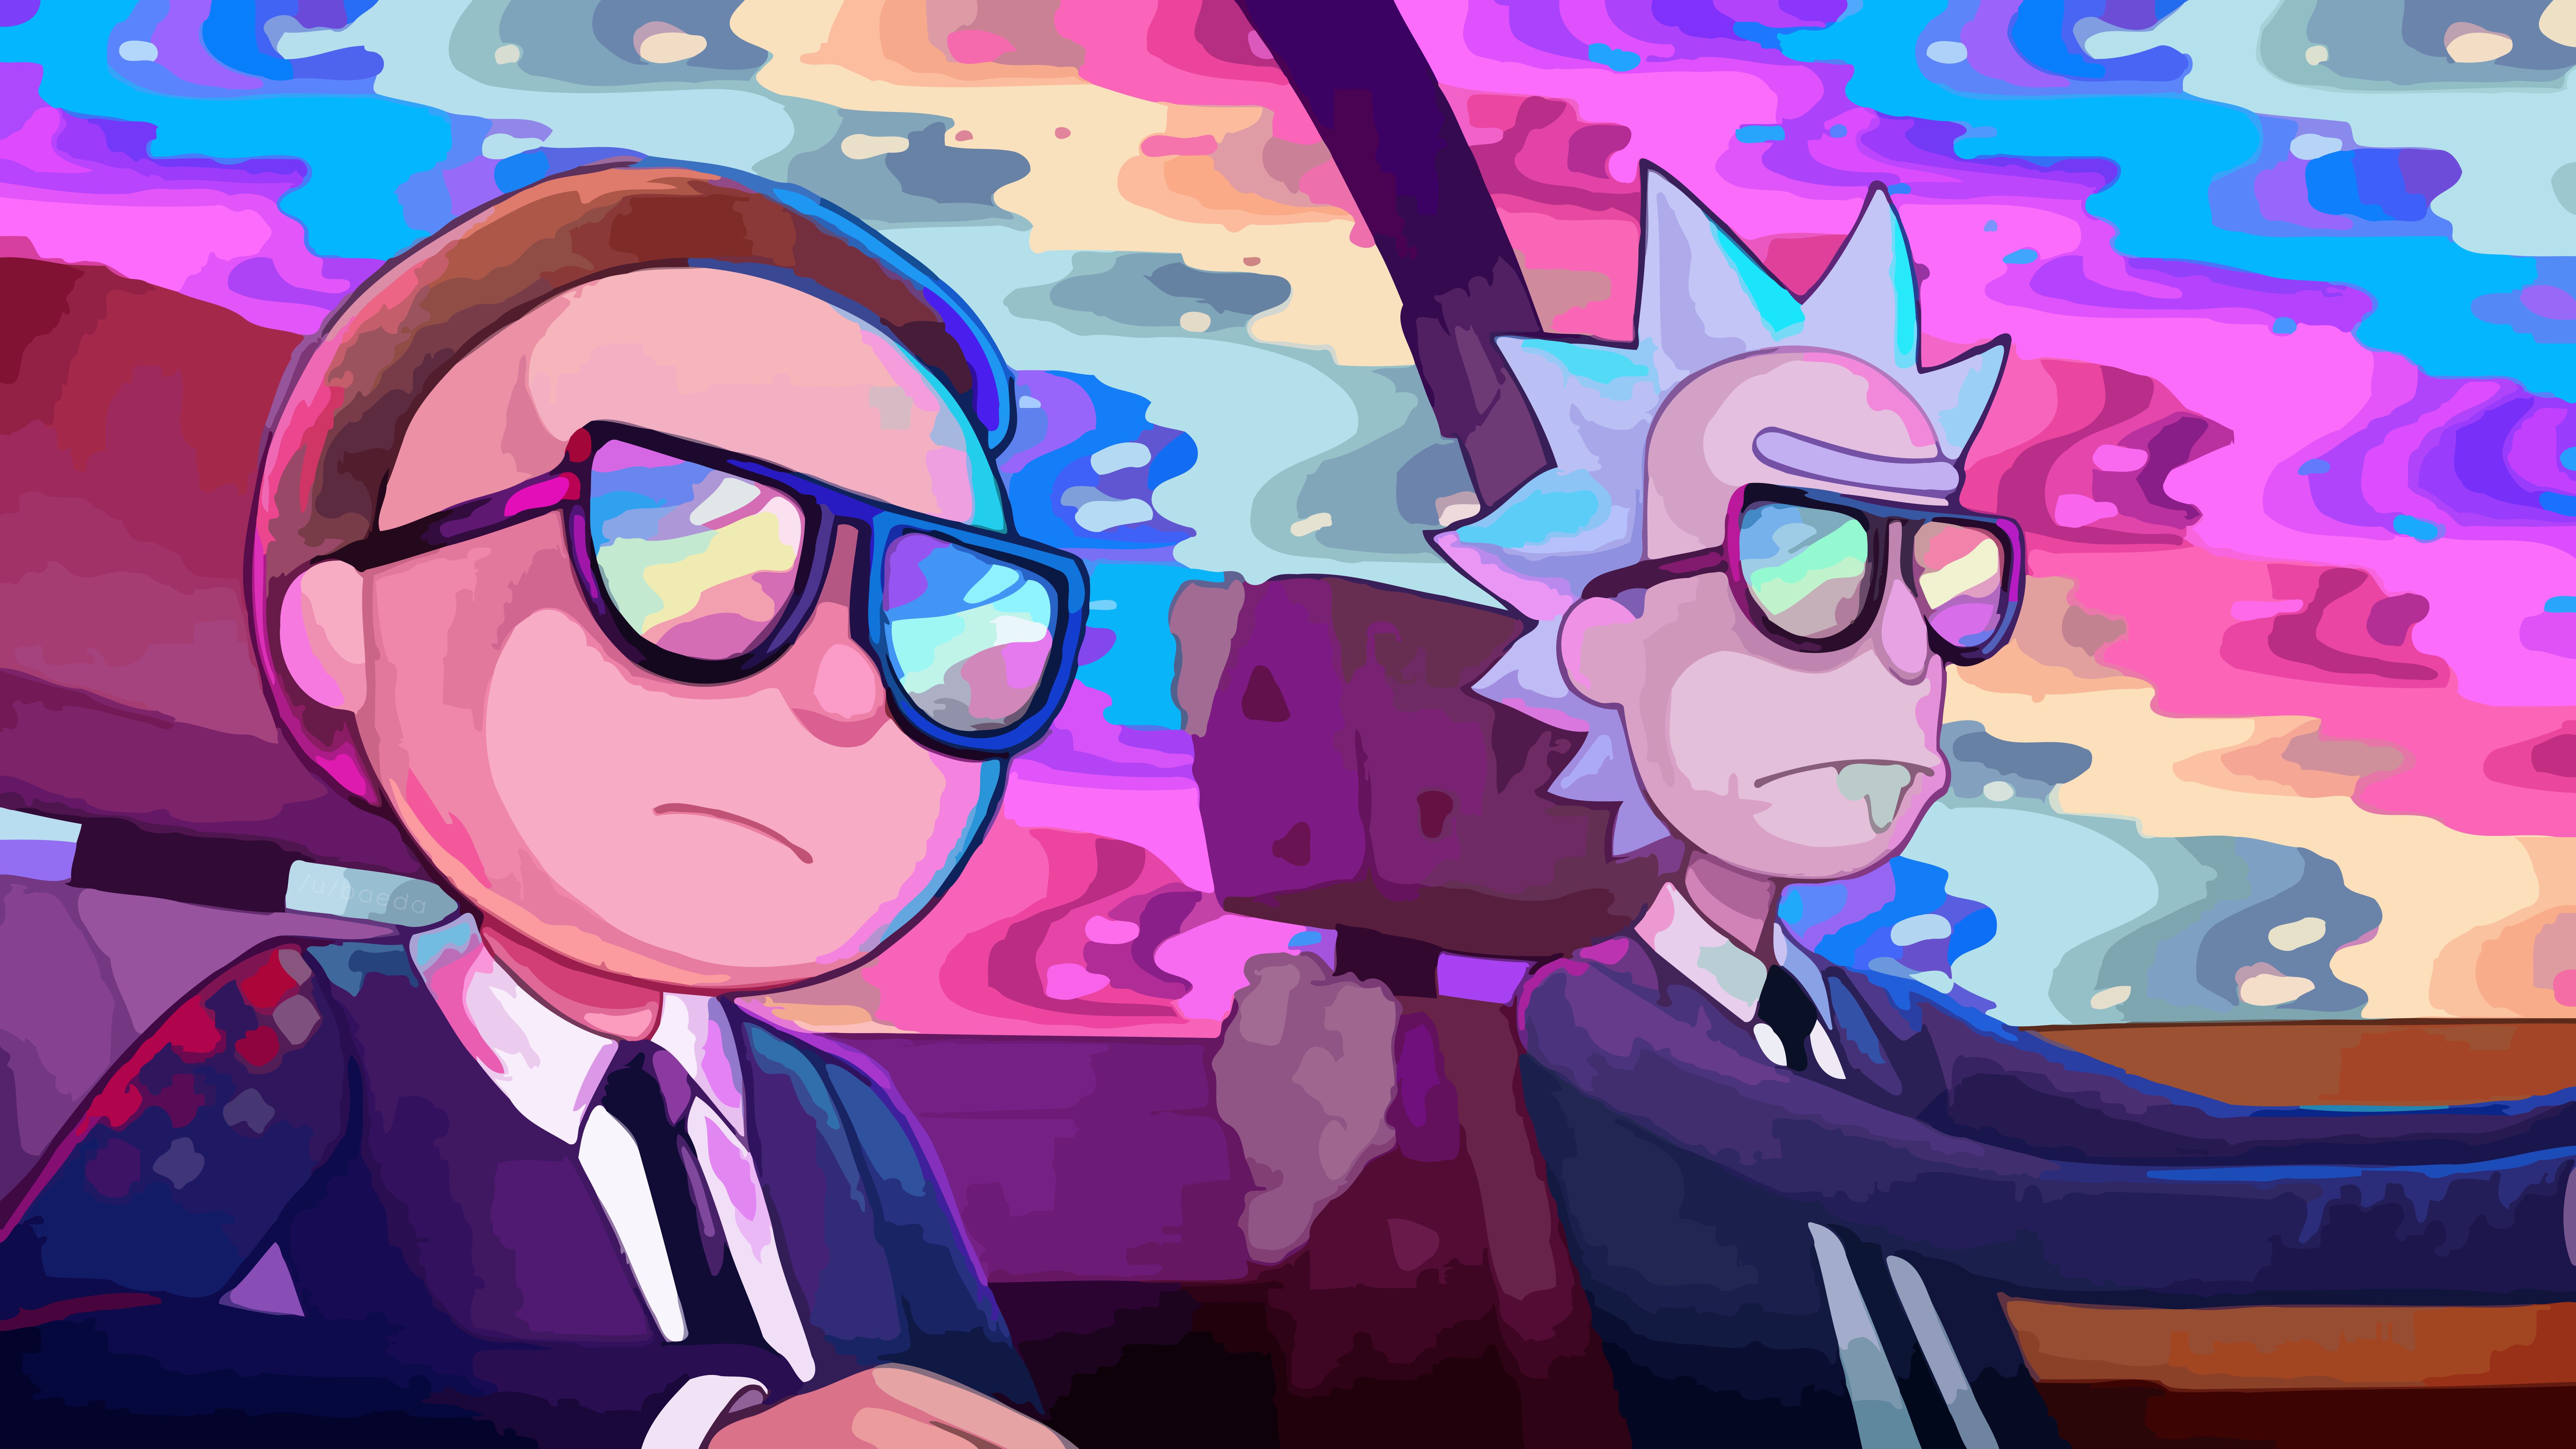 rick and morty, rick sanchez, run the jewels, tv show, morty smith, glasses Free Stock Photo